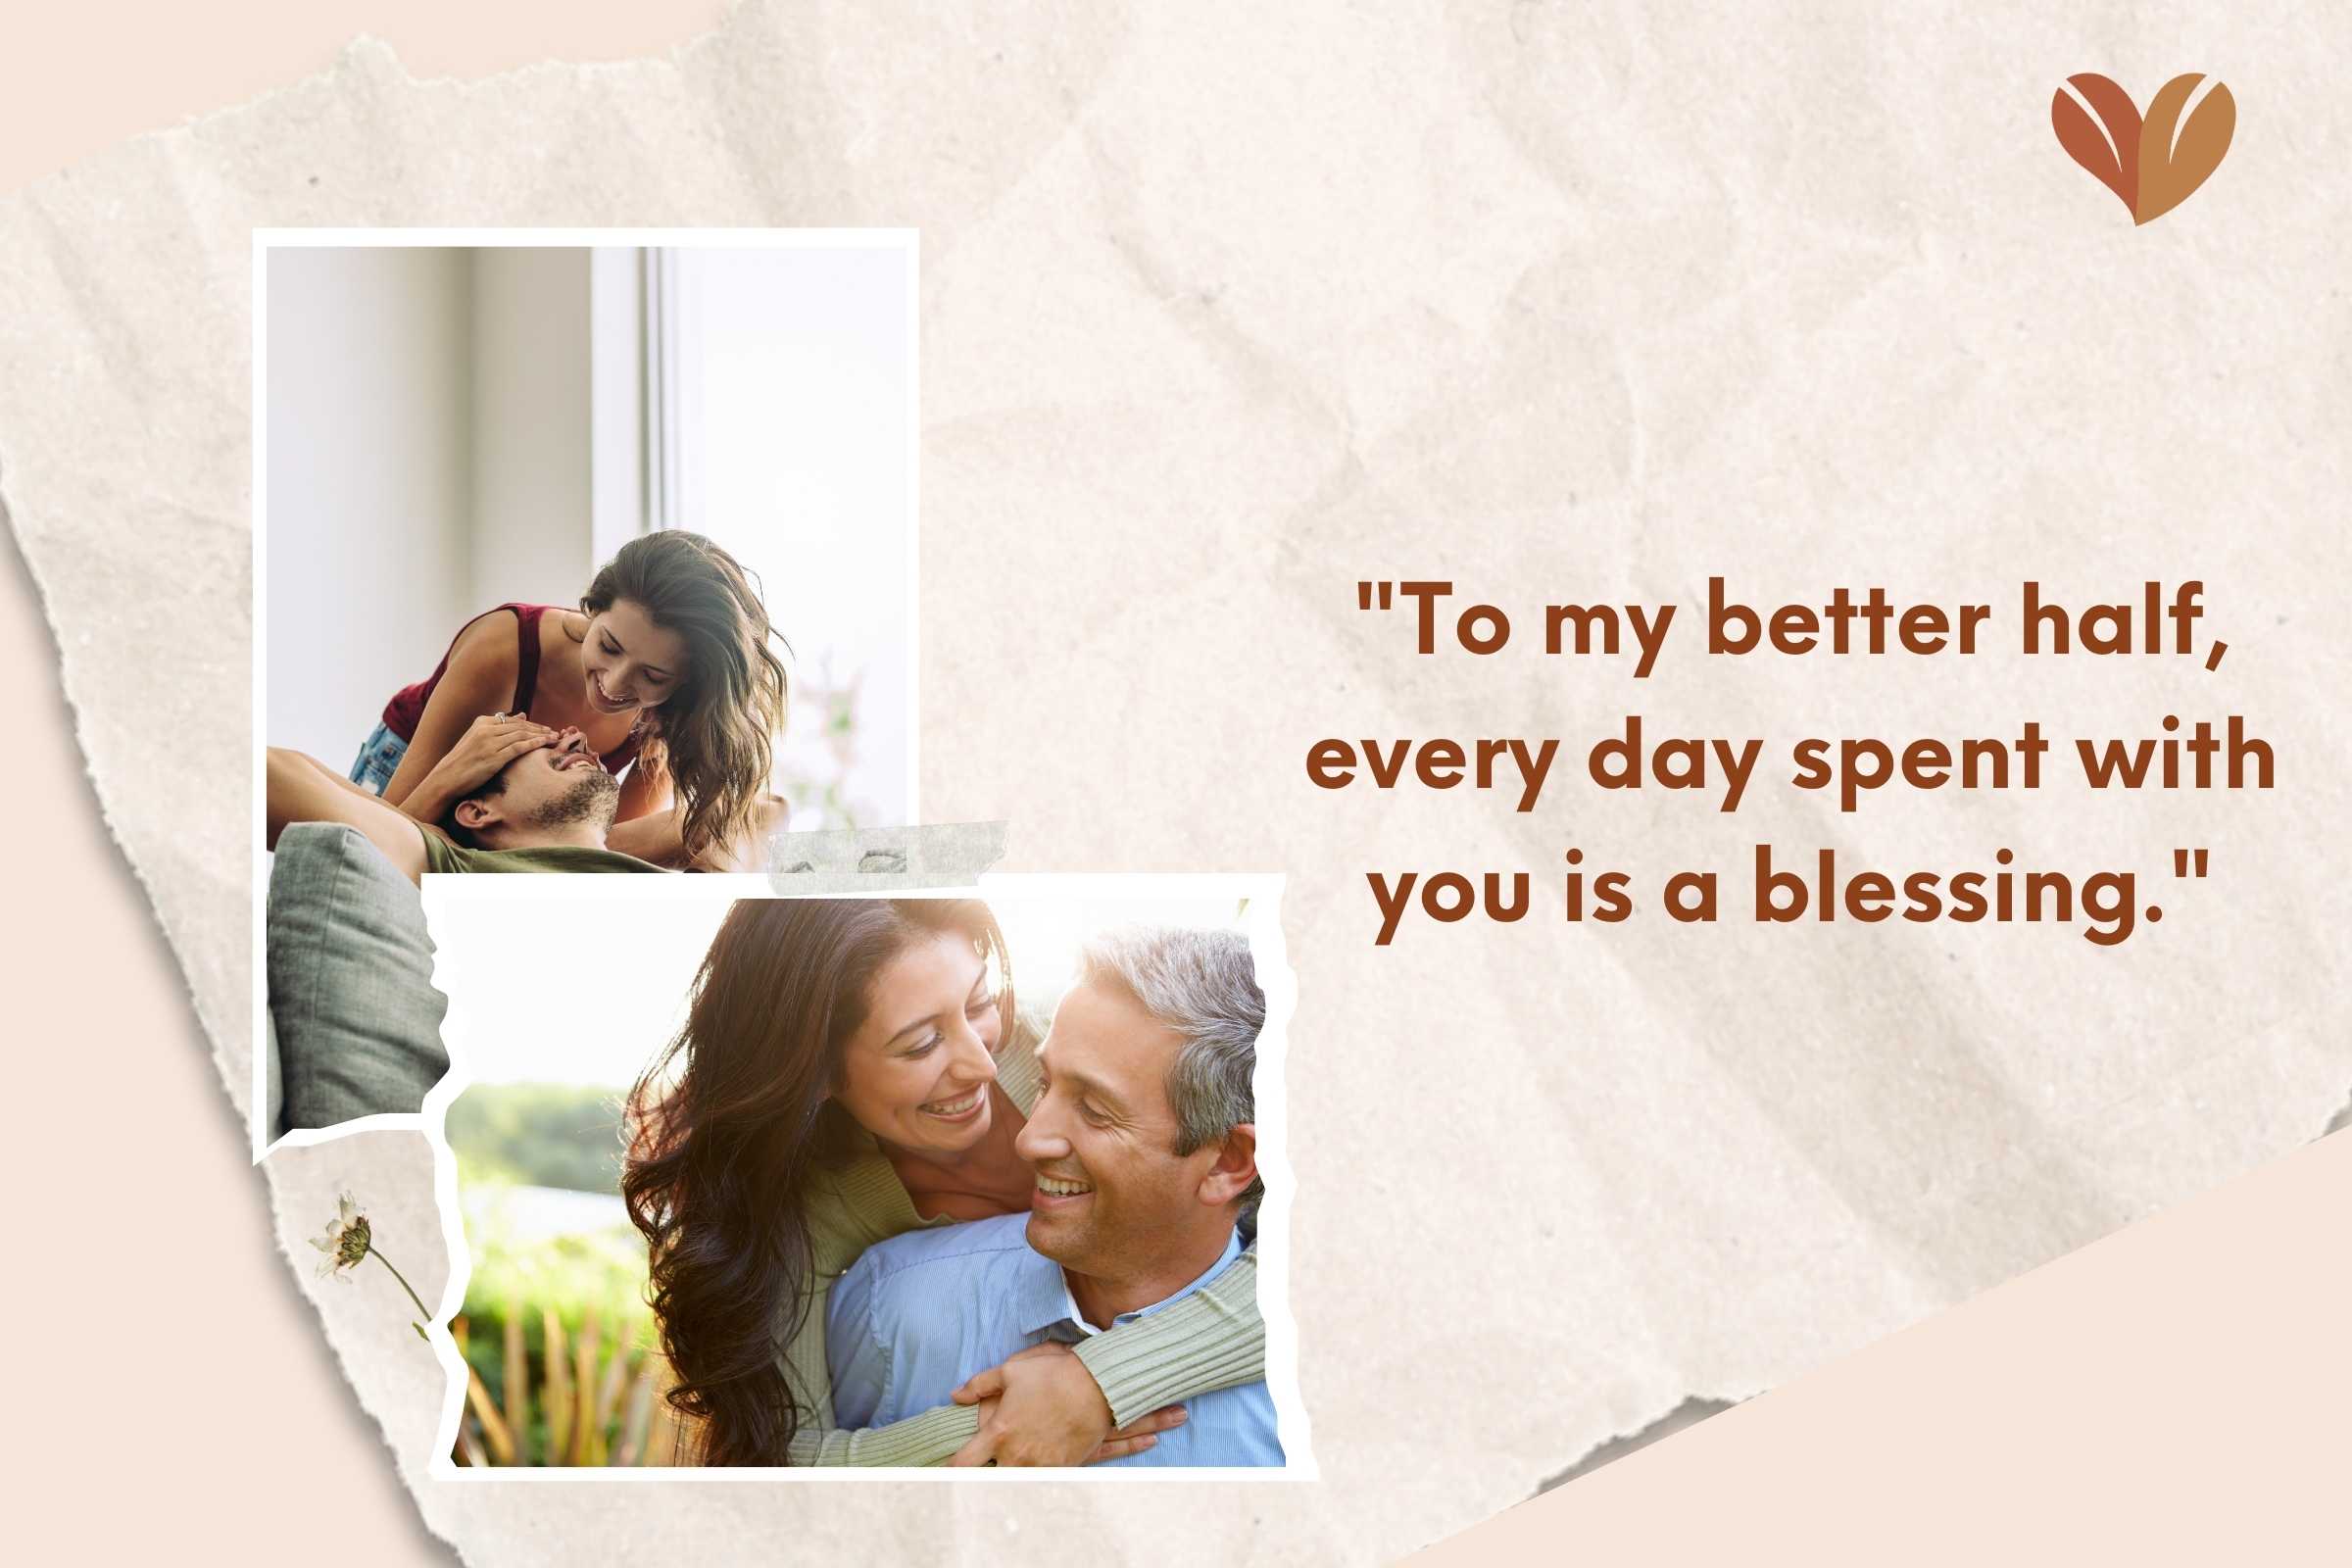 A picture-perfect moment to inspire your Anniversary card messages.